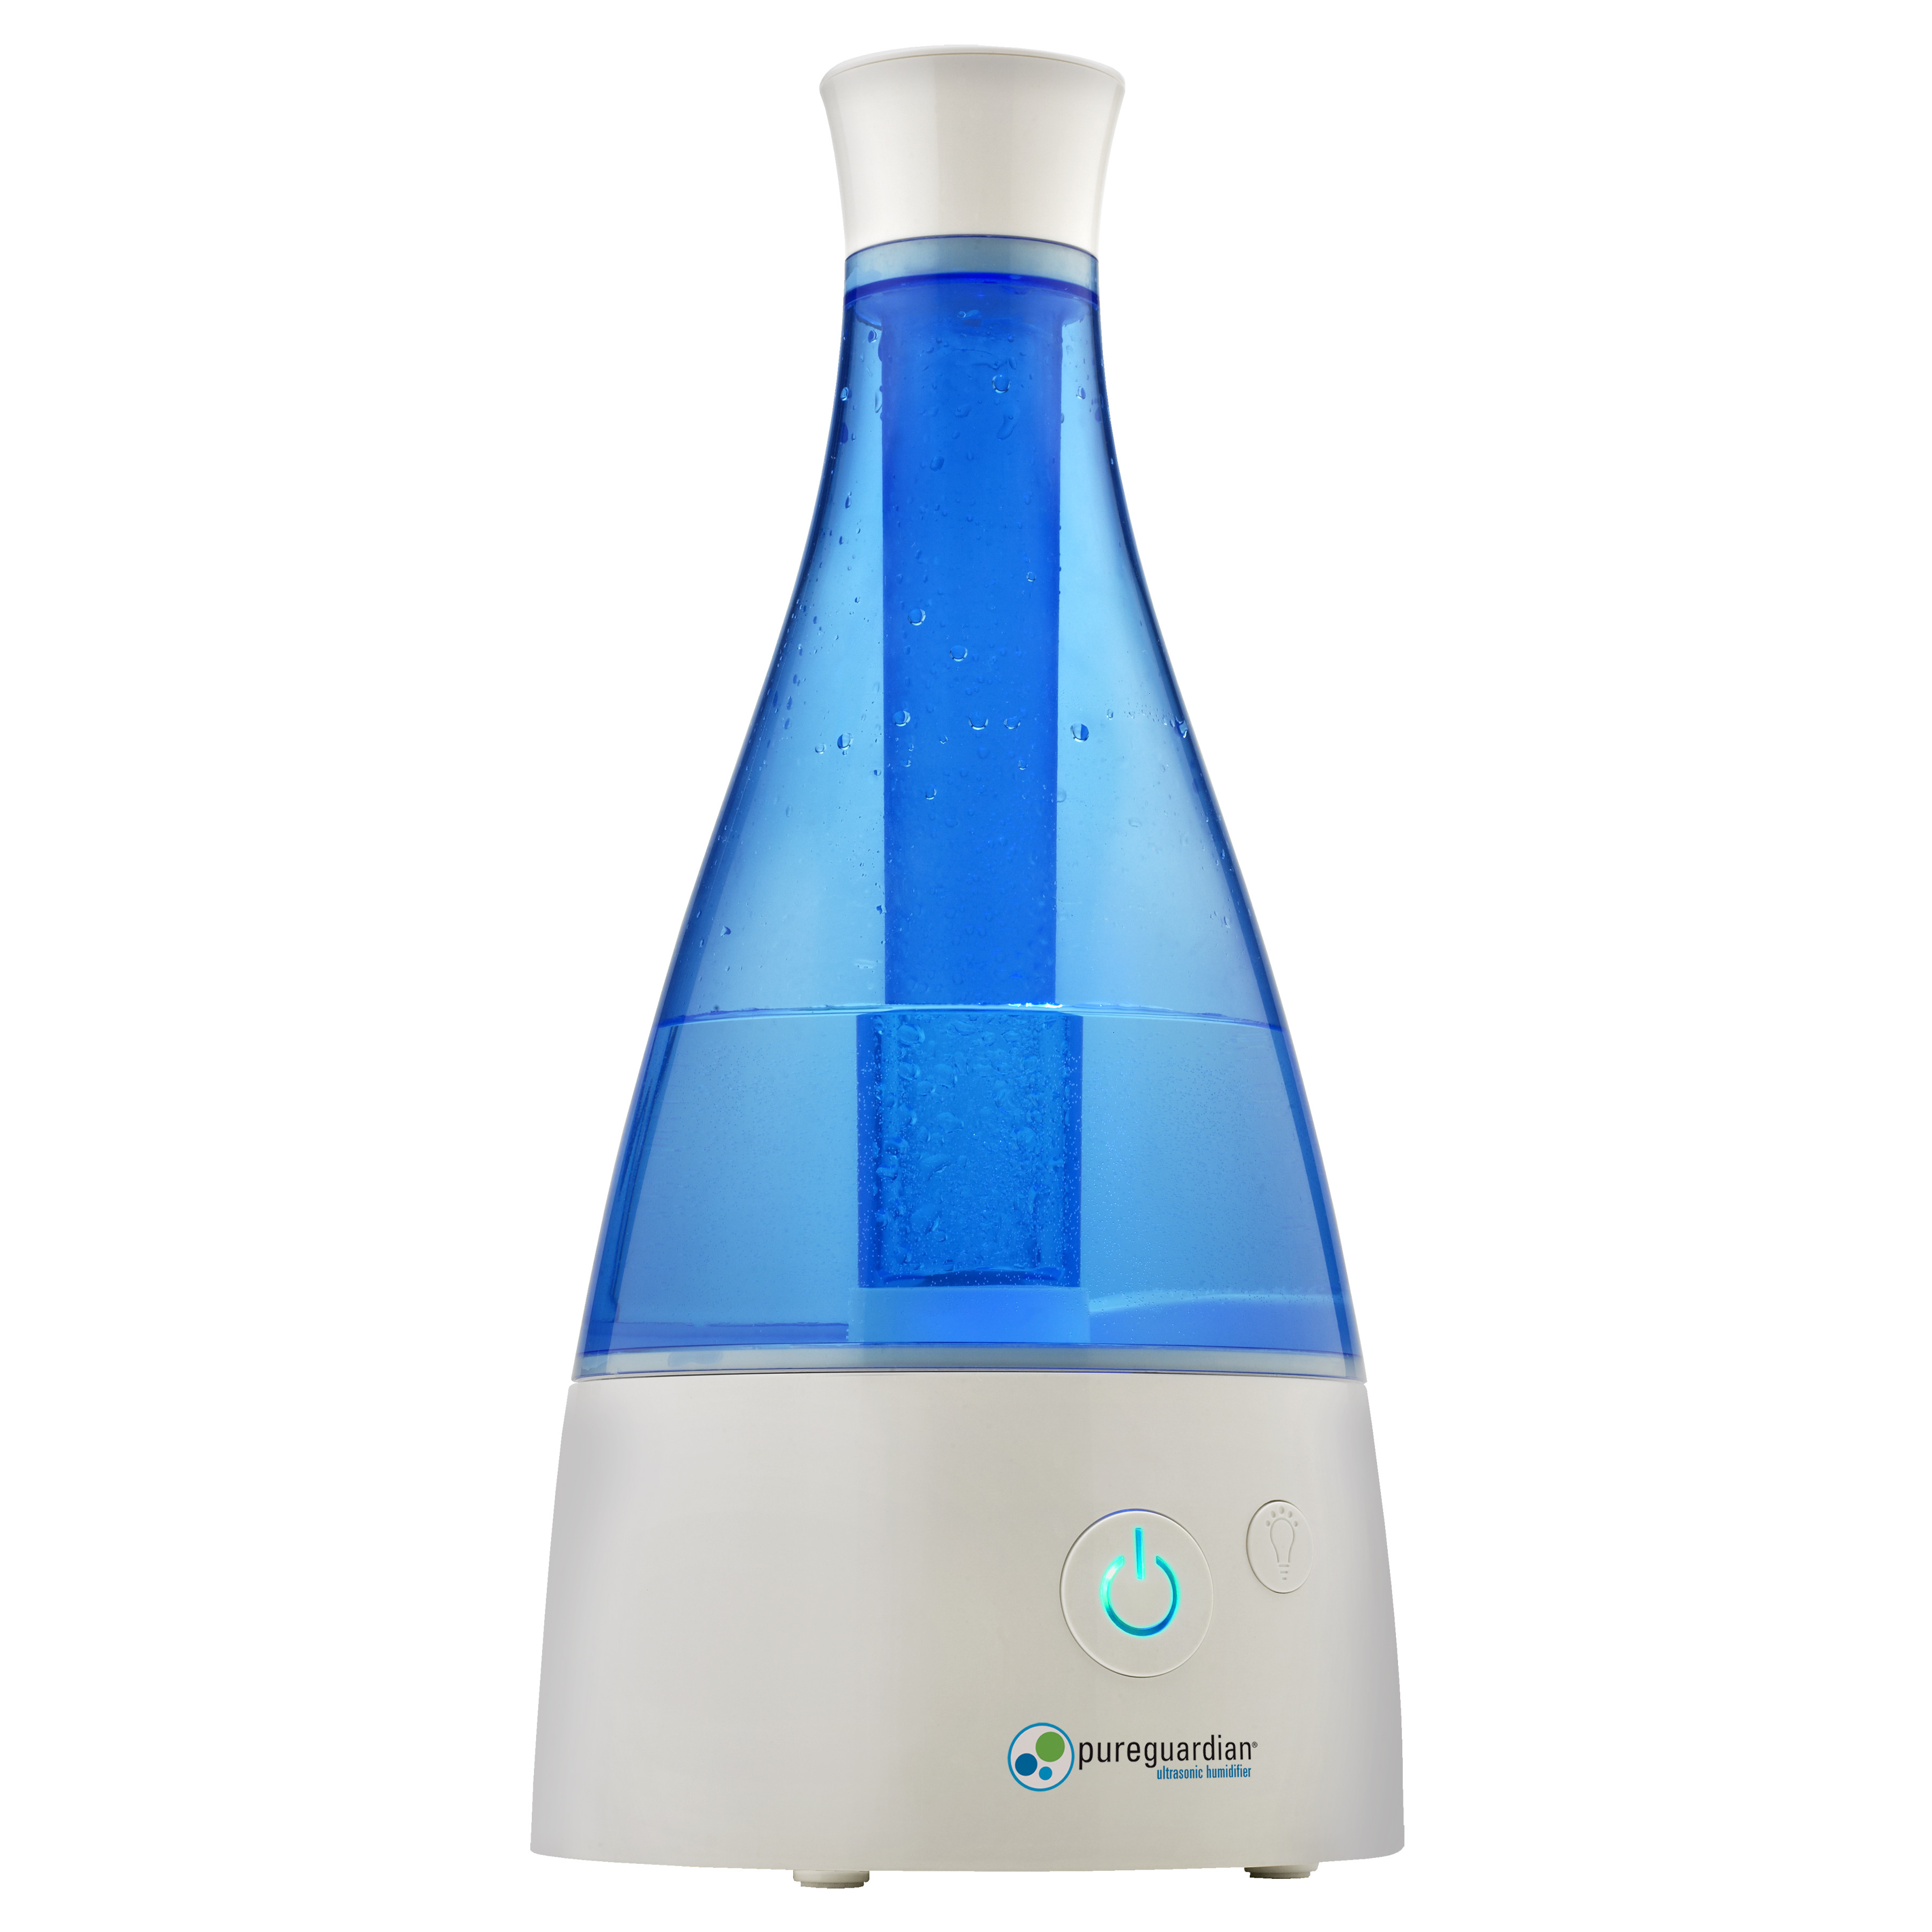 PureGuardian 30-Hour, 0.5 Gallon, Cool Mist Ultrasonic Humidifier with Aromatherapy Tray, H940AR - image 1 of 9